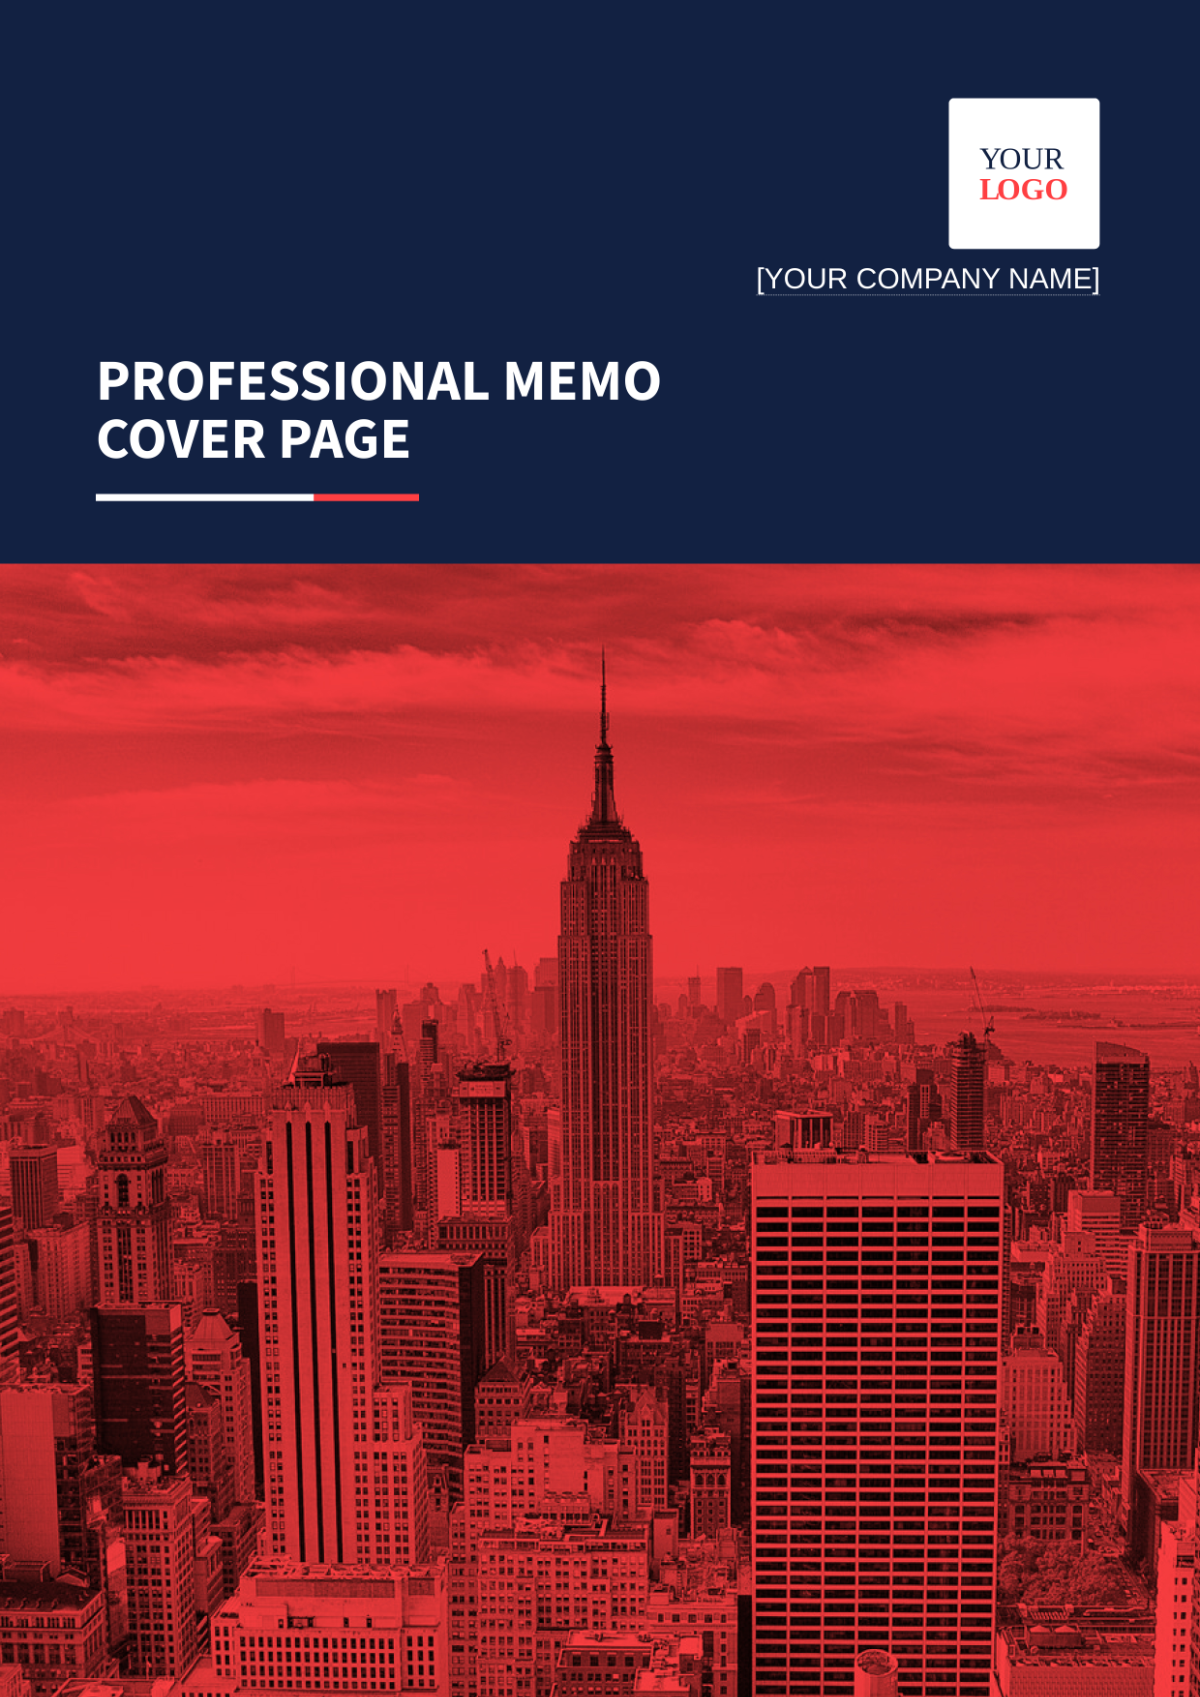 Professional Memo Cover Page